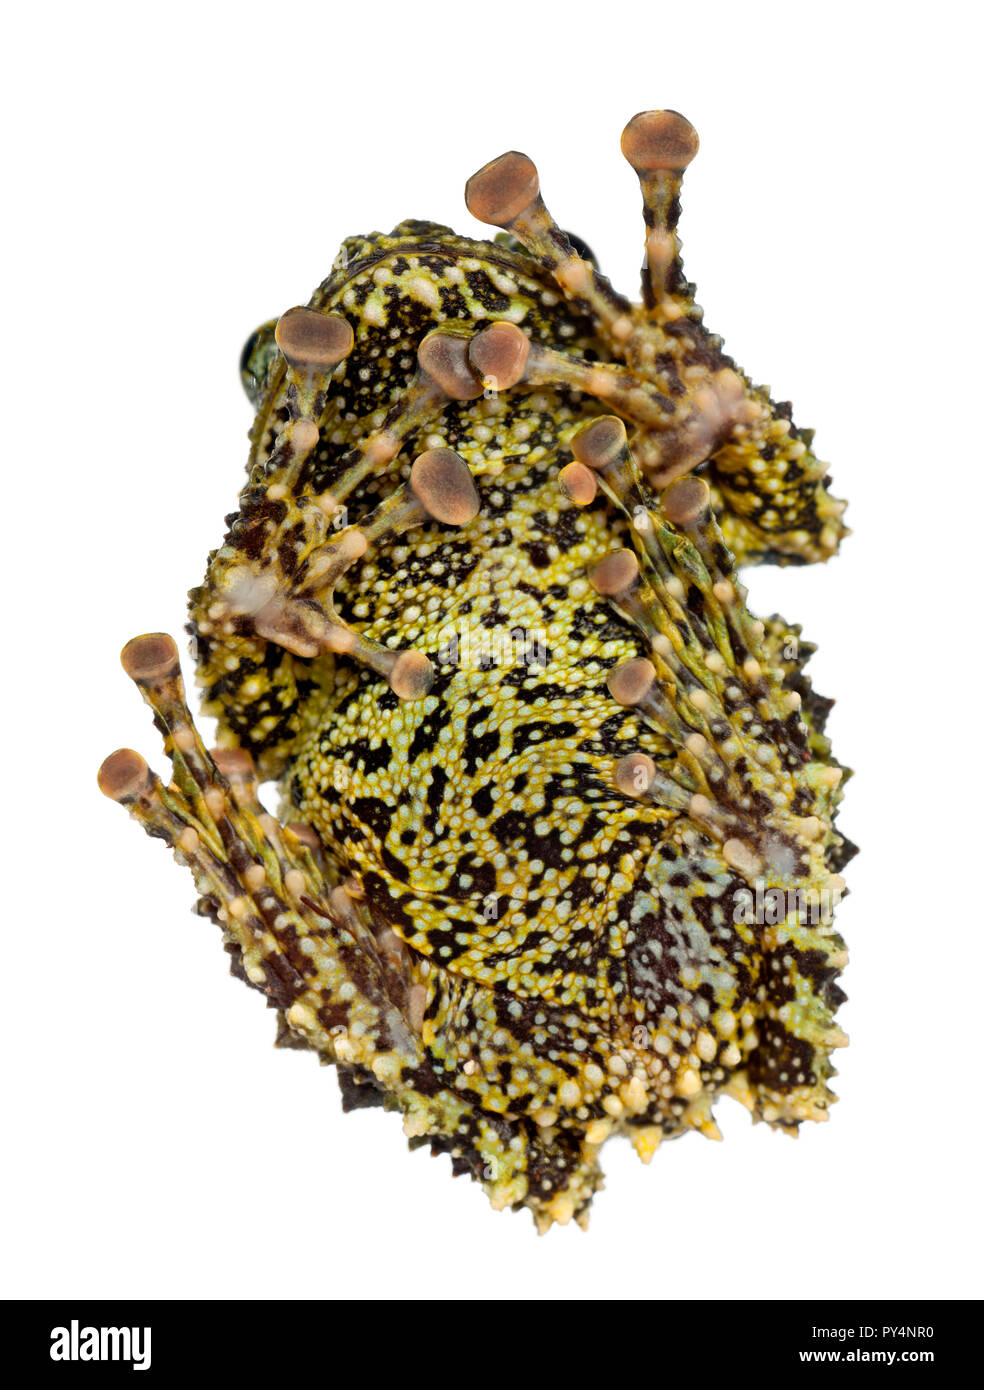 Mossy Frog, Theloderma corticale, also known as a Vietnamese Mossy Frog, or Tonkin Bug-eyed Frog, against white background Stock Photo